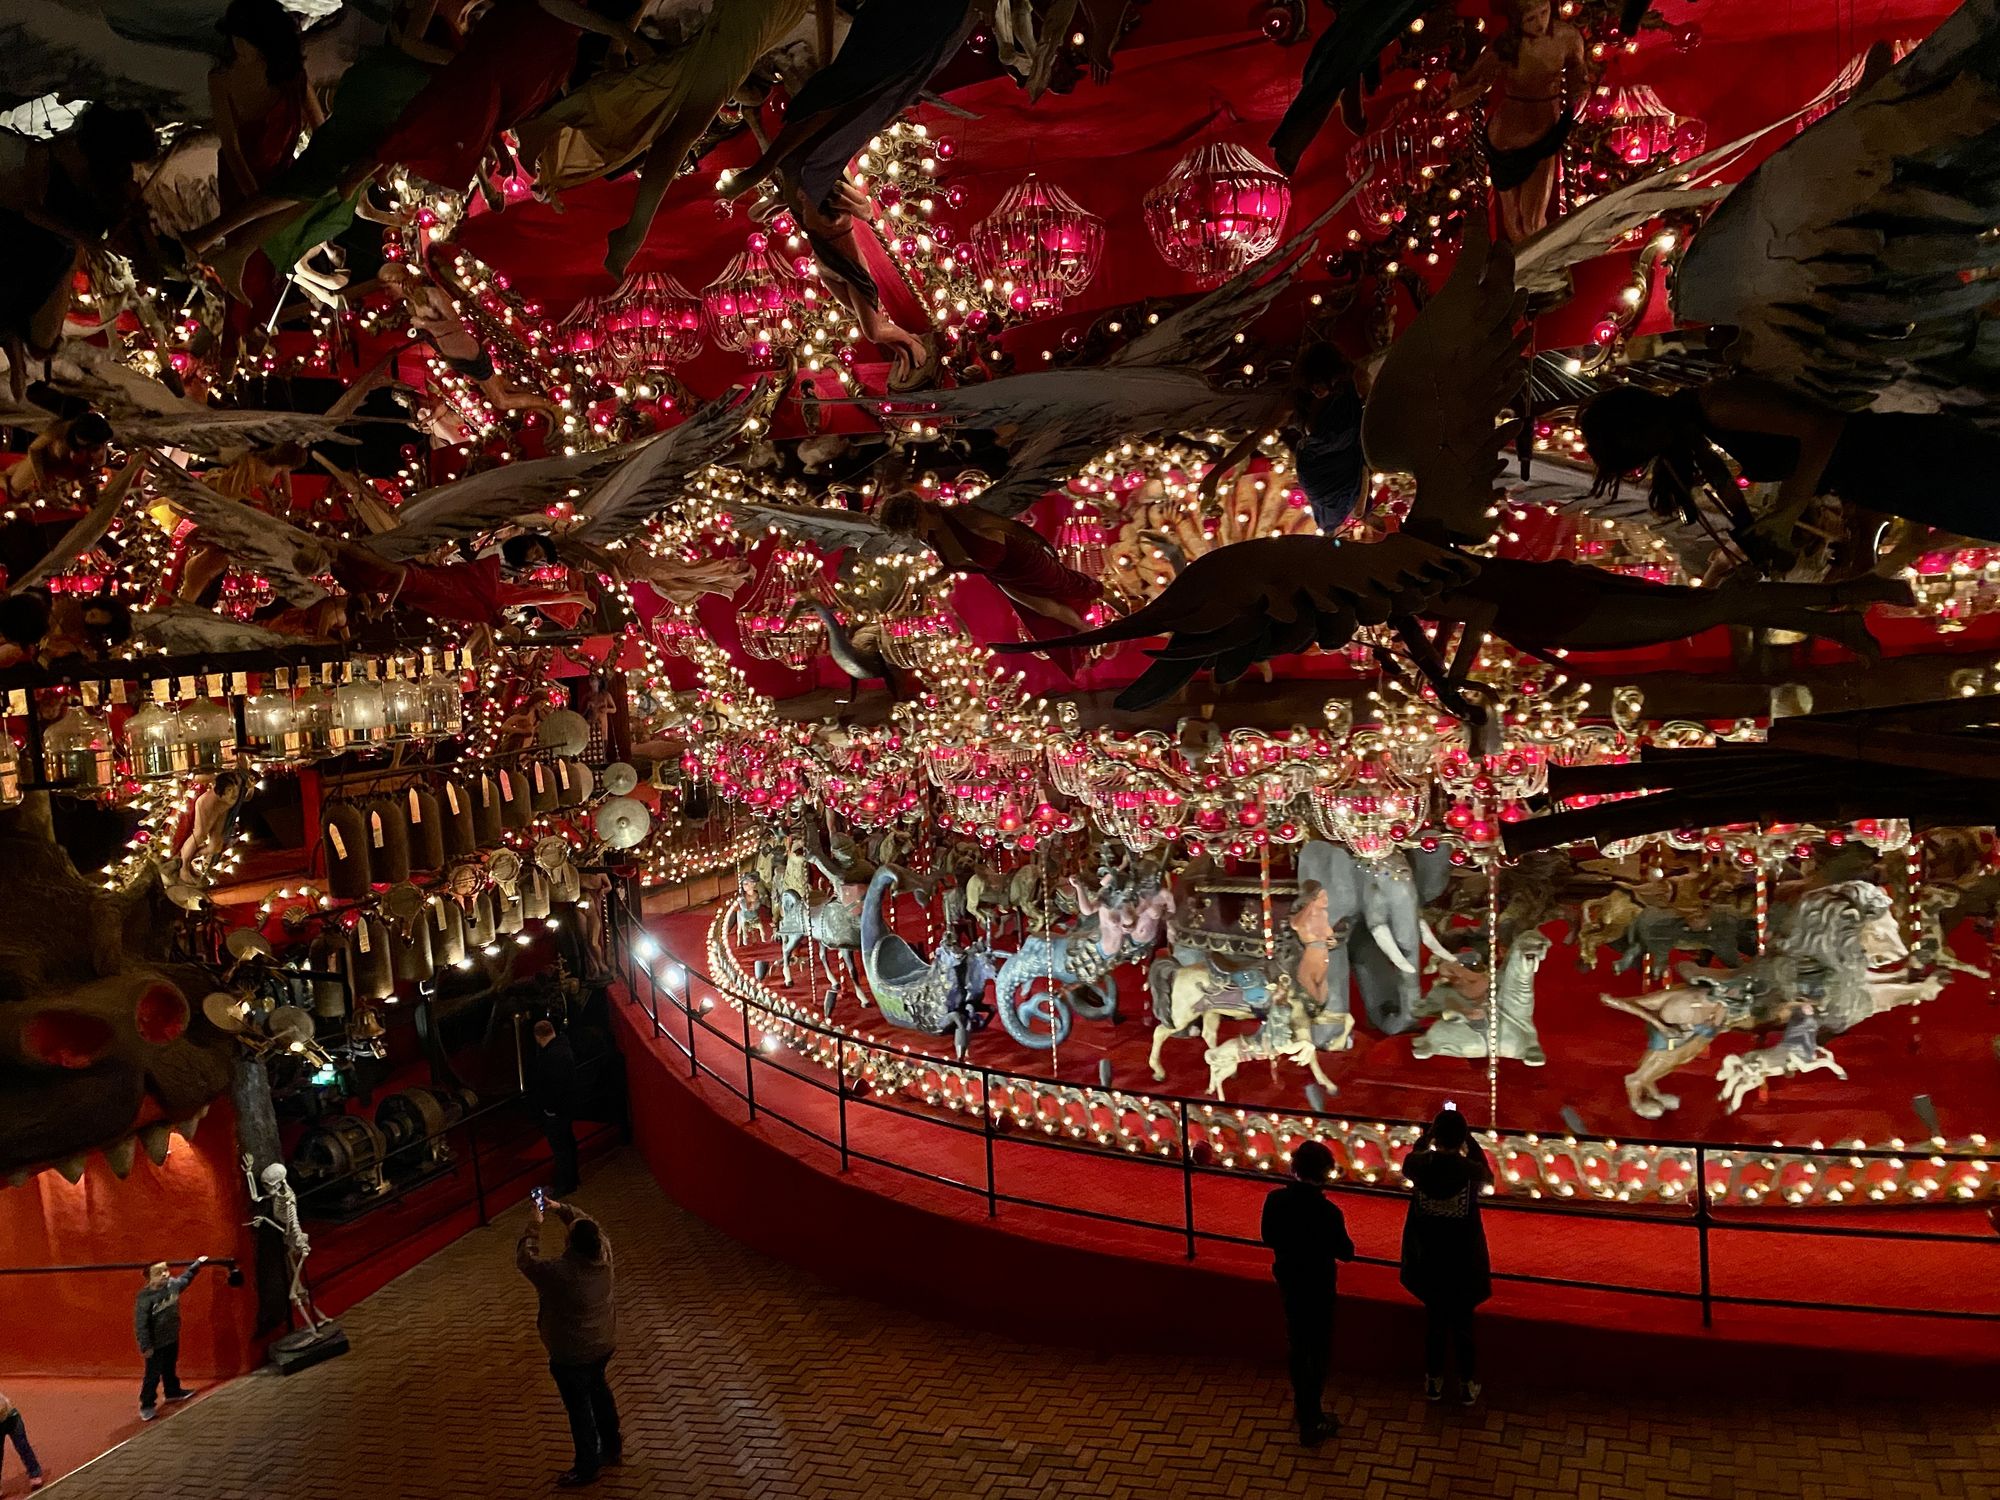 A gigantic, brightly-lit carousel, rimmed in red, with mannequins-as-angels sweeping the ceiling above it